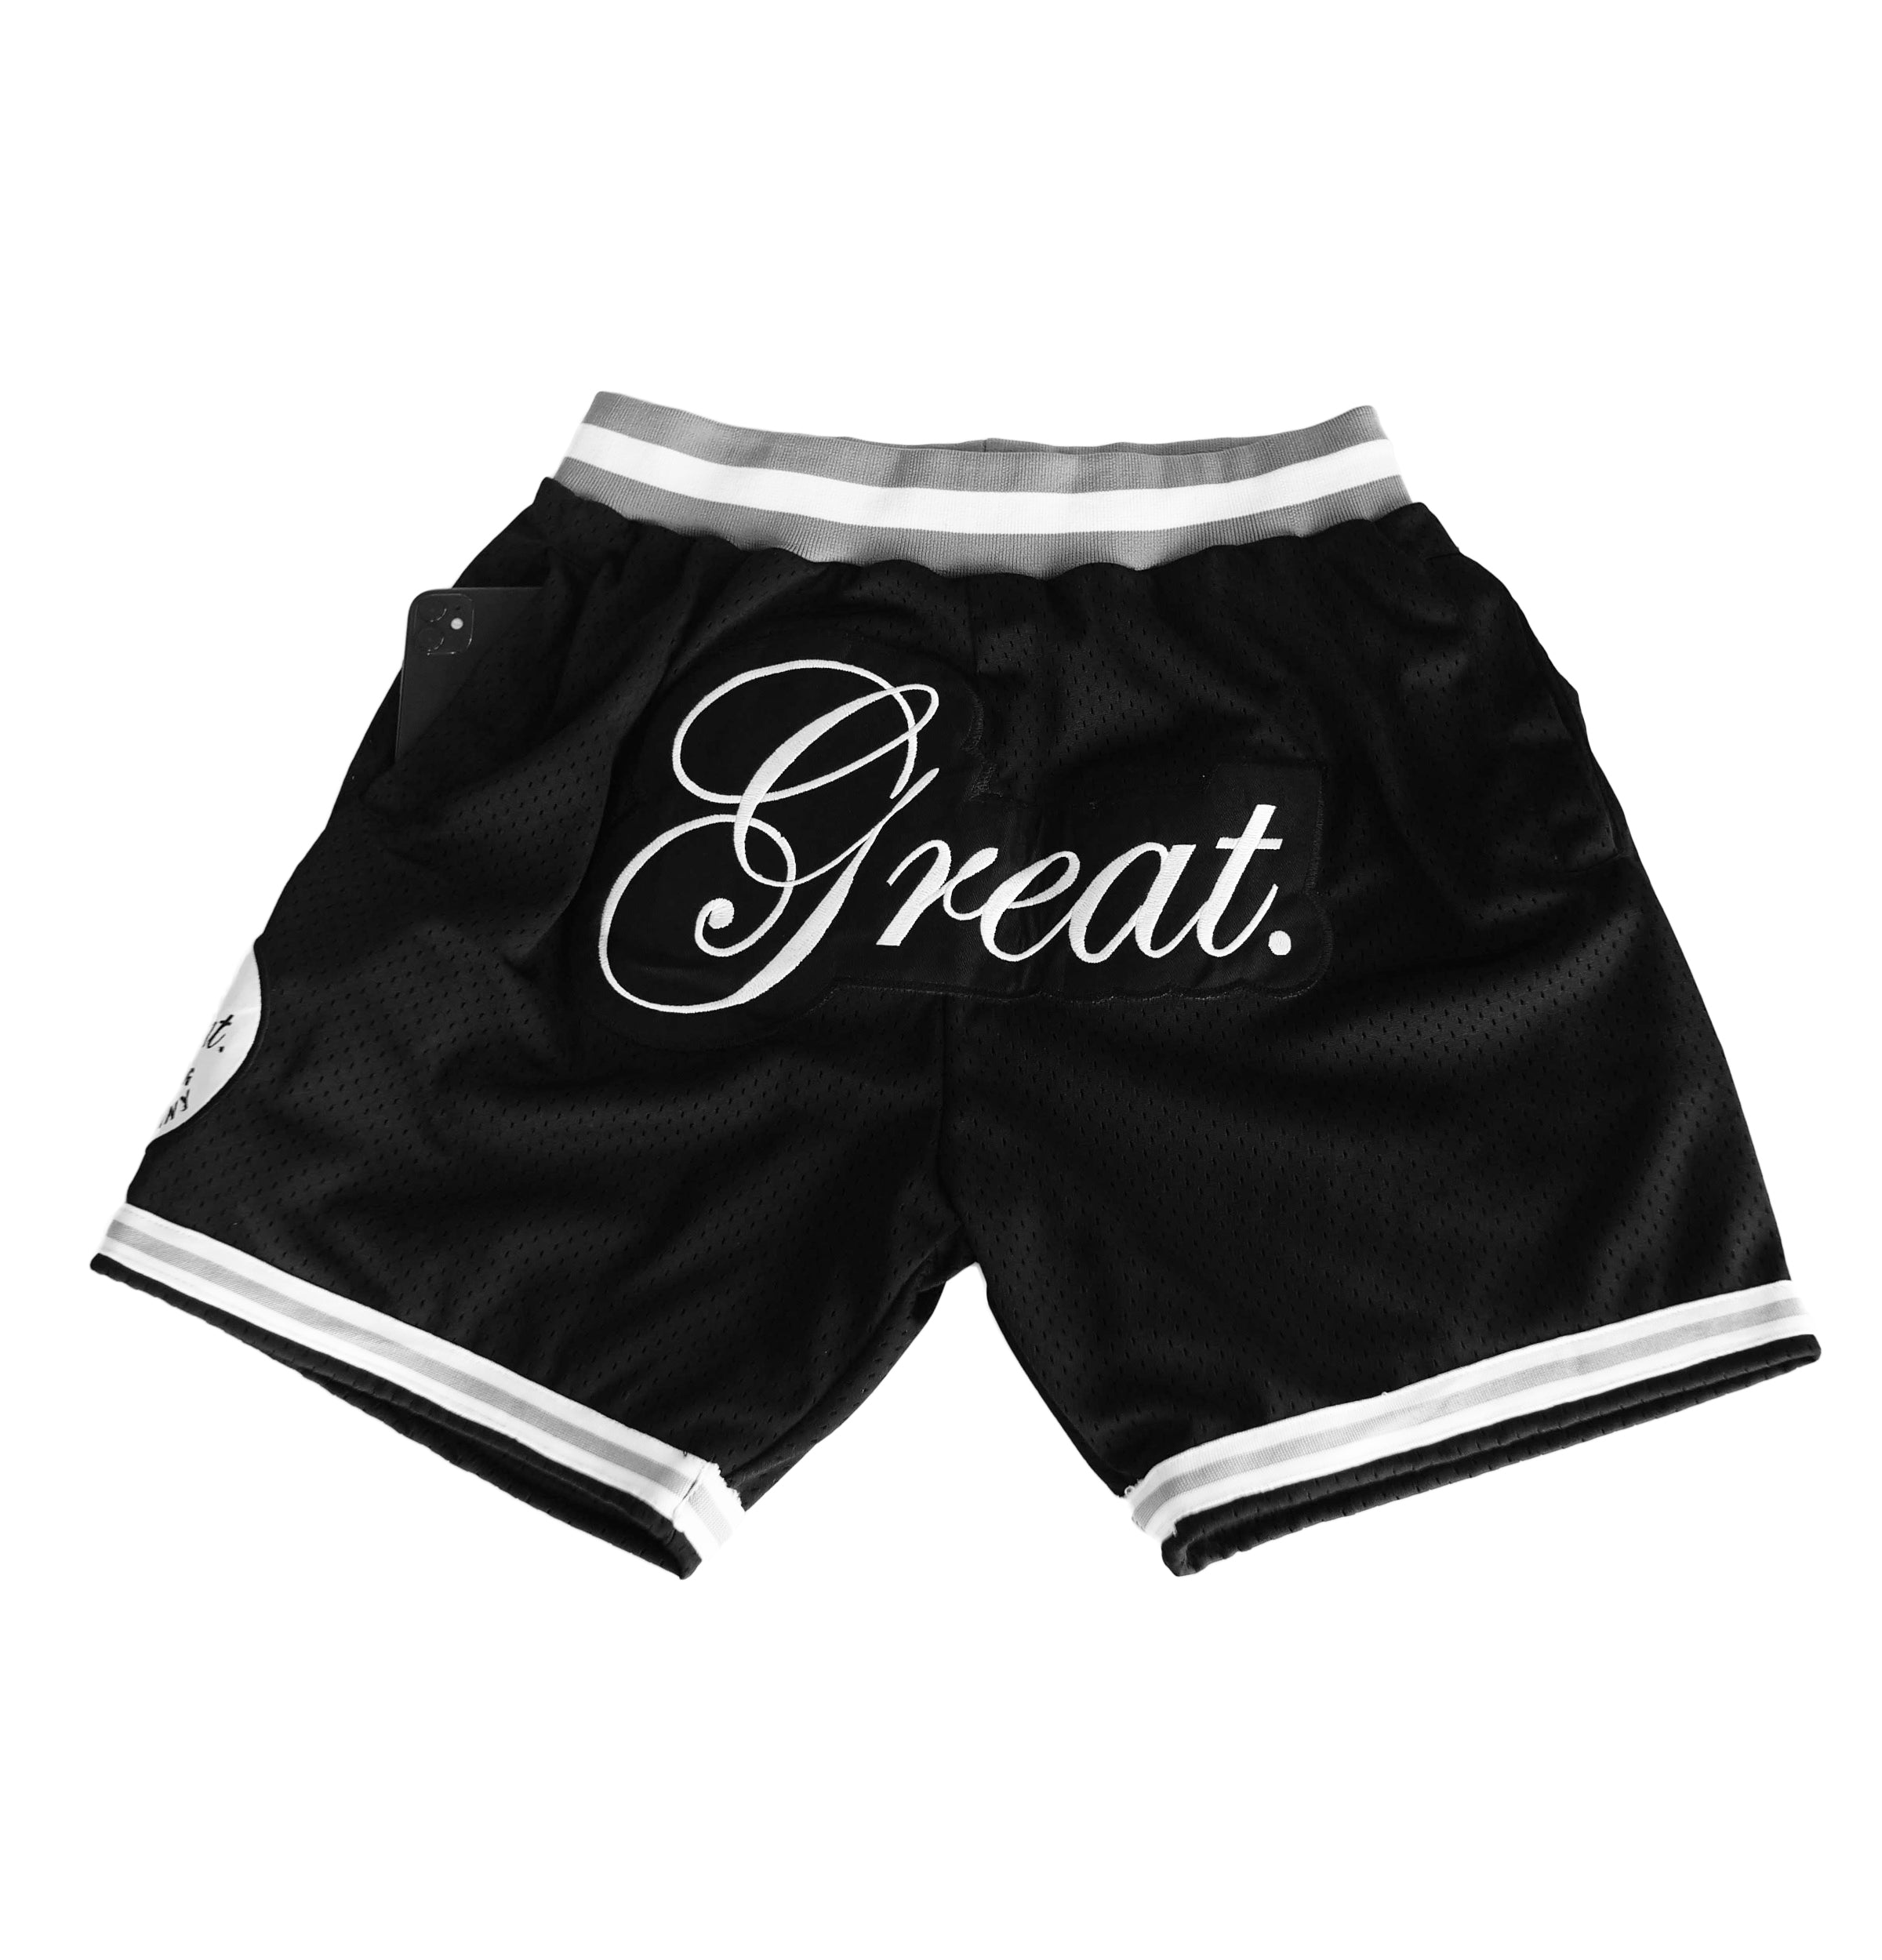 The Great Shorts